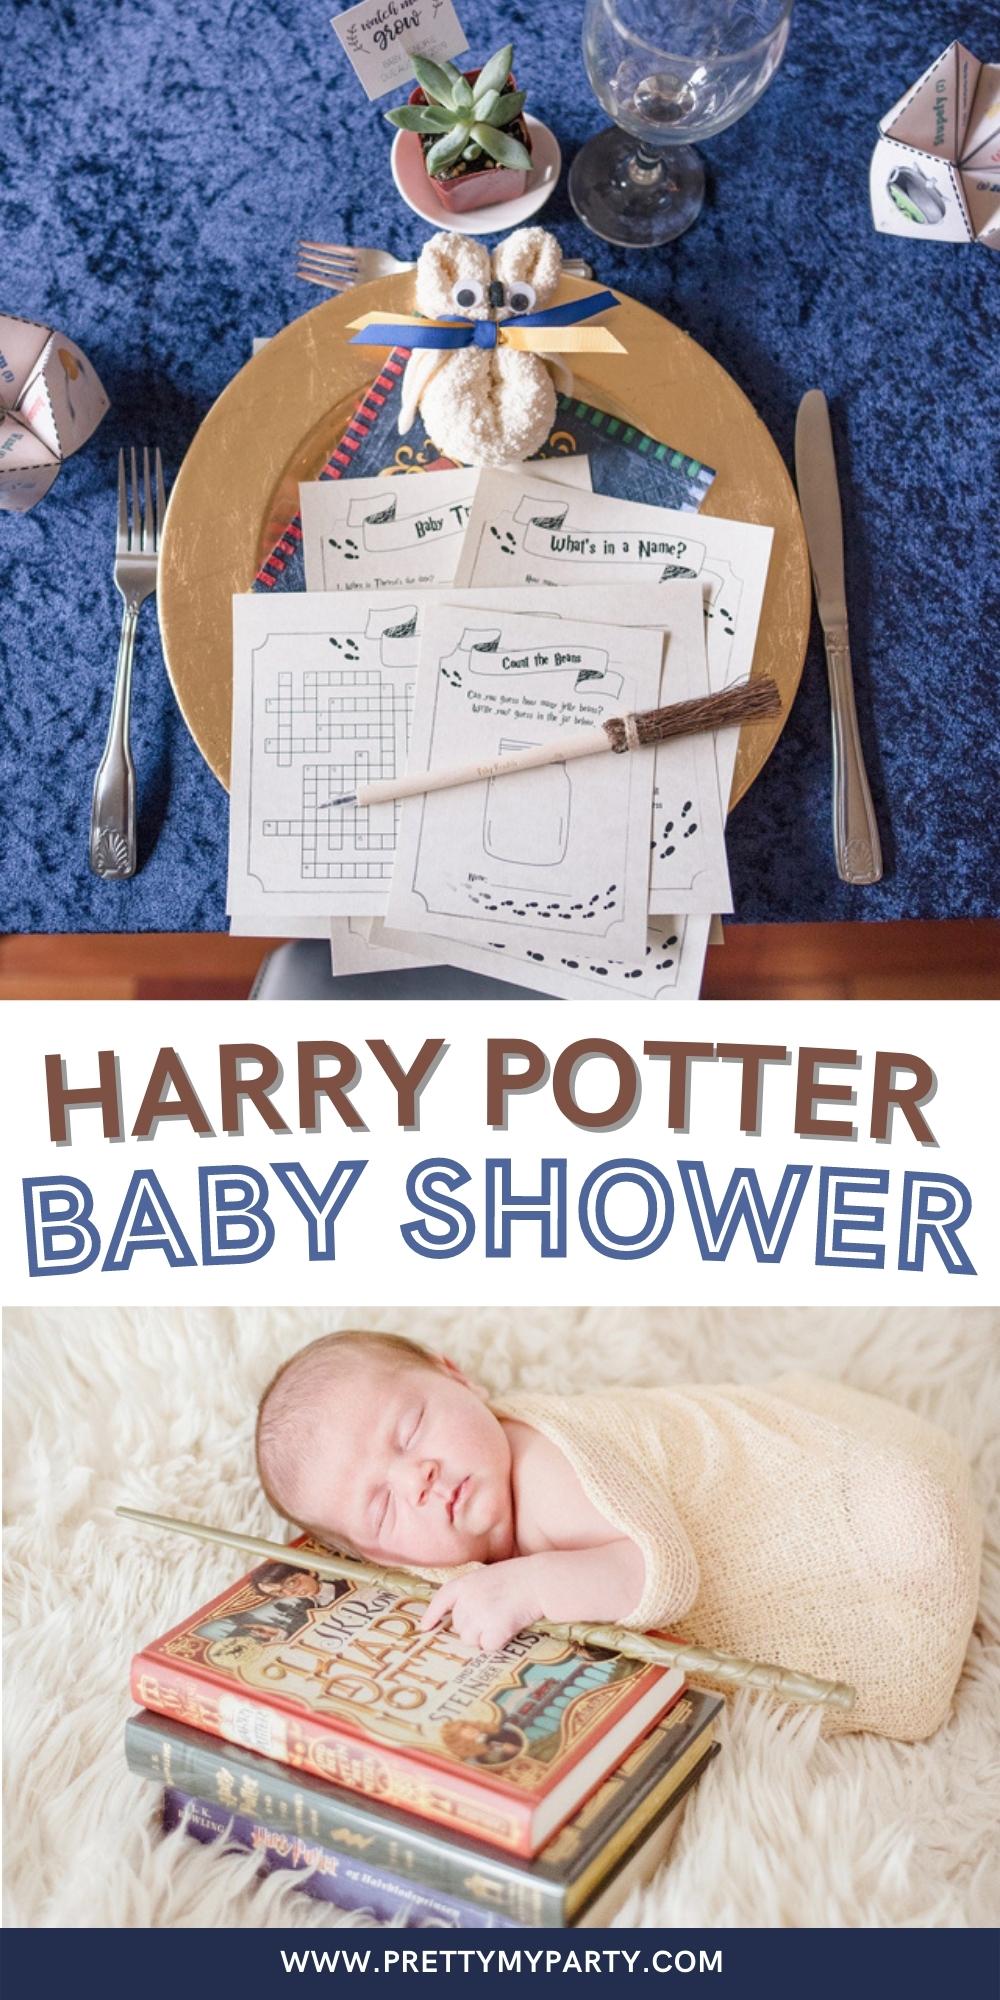 Harry Potter Baby Shower - Pretty My Party